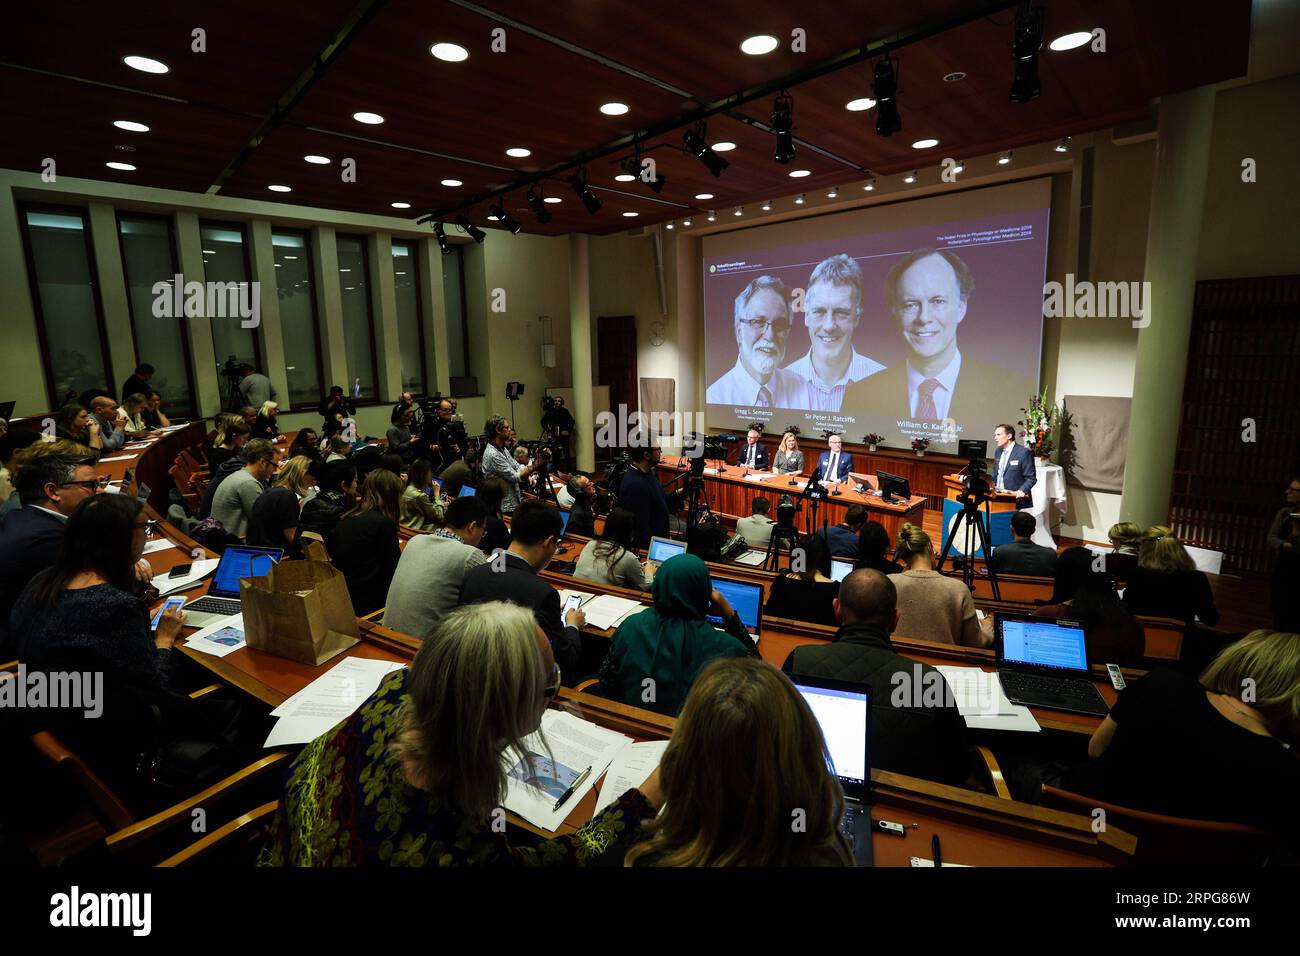 191007 -- STOCKHOLM, Oct. 7, 2019 -- Photo taken on Oct. 7, 2019 shows the announcement of the 2019 Nobel Prize in Physiology or Medicine at the Karolinska Institute in Stockholm, Sweden, Oct. 7, 2019. The prize was awarded jointly to William G. Kaelin Jr, Peter J. Ratcliffe and Gregg L. Semenza for their discoveries of how cells sense and adapt to oxygen availability, said the Nobel Assembly at the Karolinska Institute.  SWEDEN-STOCKHOLM-2019 NOBEL PRIZE ANNOUNCEMENT-PHYSIOLOGY OR MEDICINE ZhengxHuansong PUBLICATIONxNOTxINxCHN Stock Photo